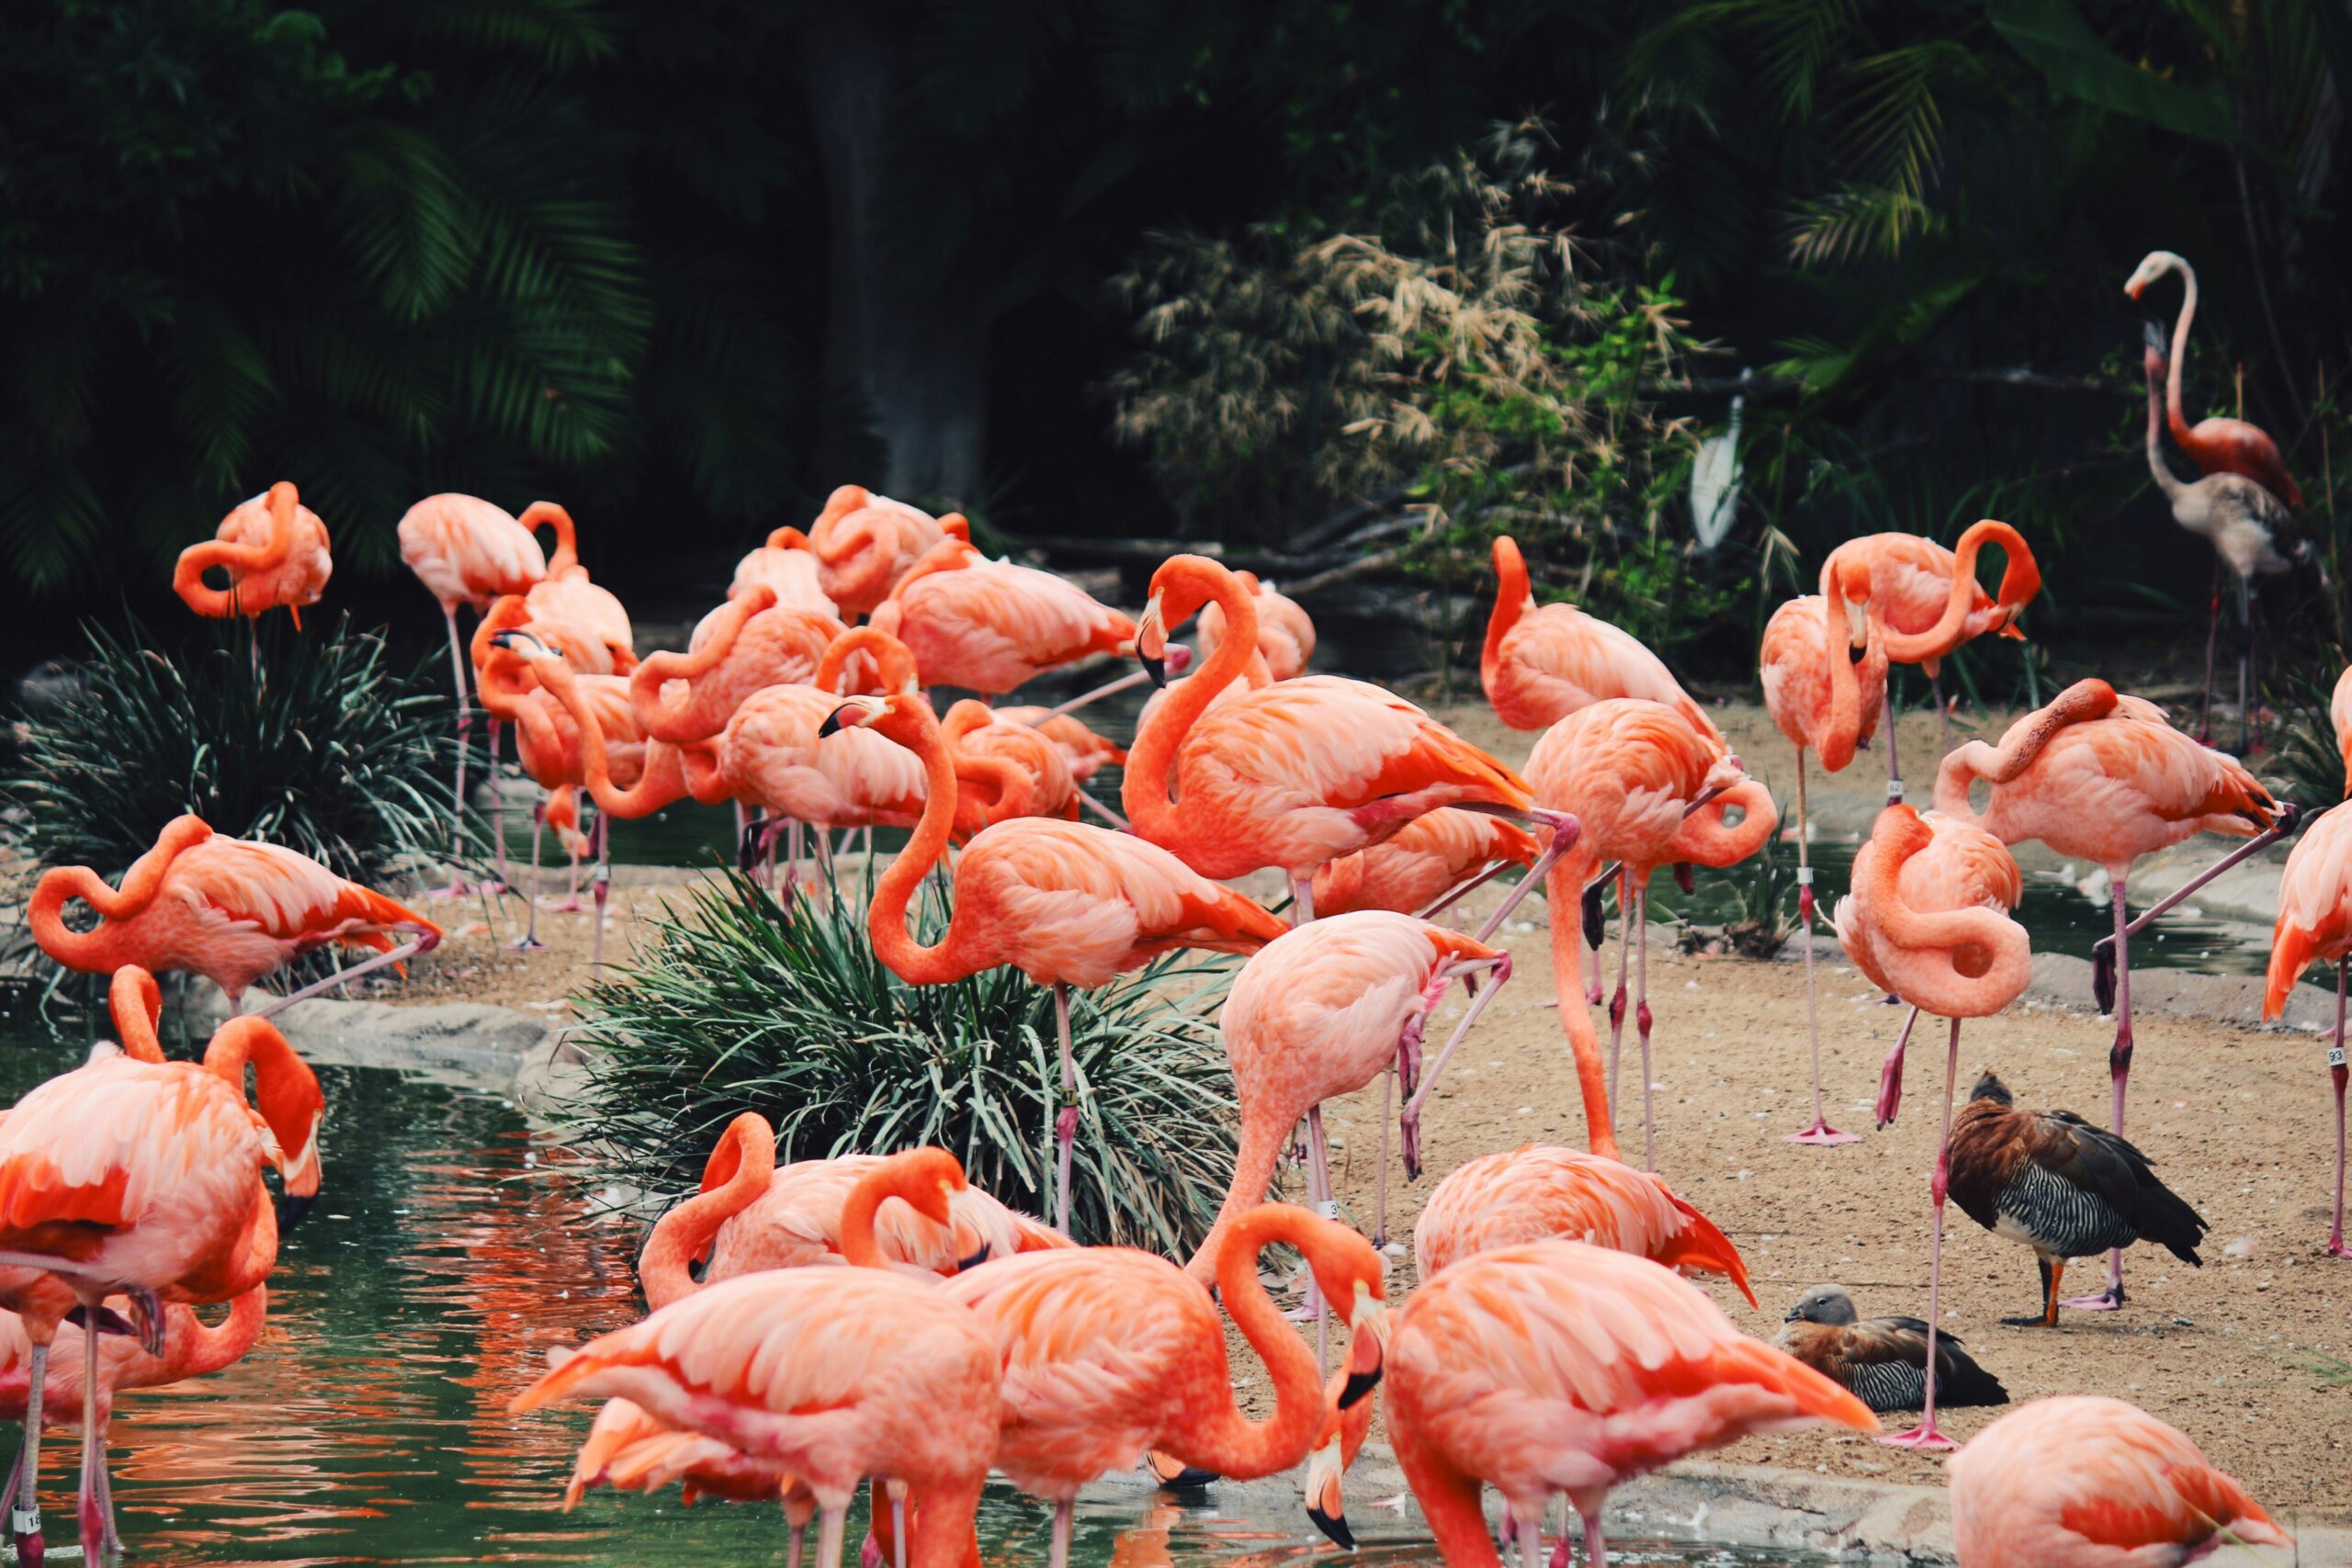 The autumn festivals of the San Diego Zoo are very popular. 
Pictured: flamingos at the San Diego Zoo